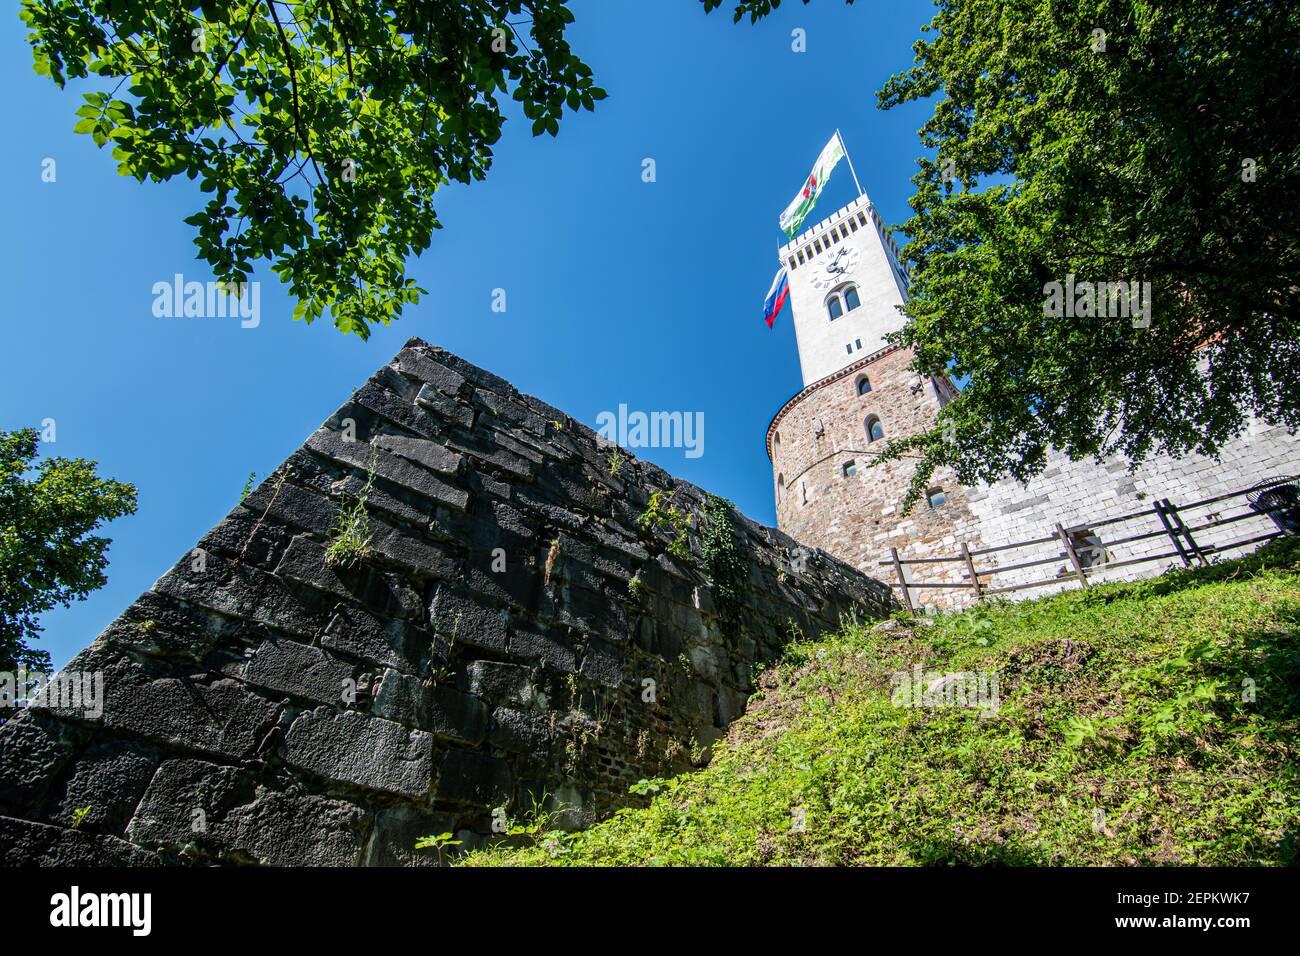 Clock tower of Ljubljana castle with town flag and part of the walls visible, Slovenia Stock Photo